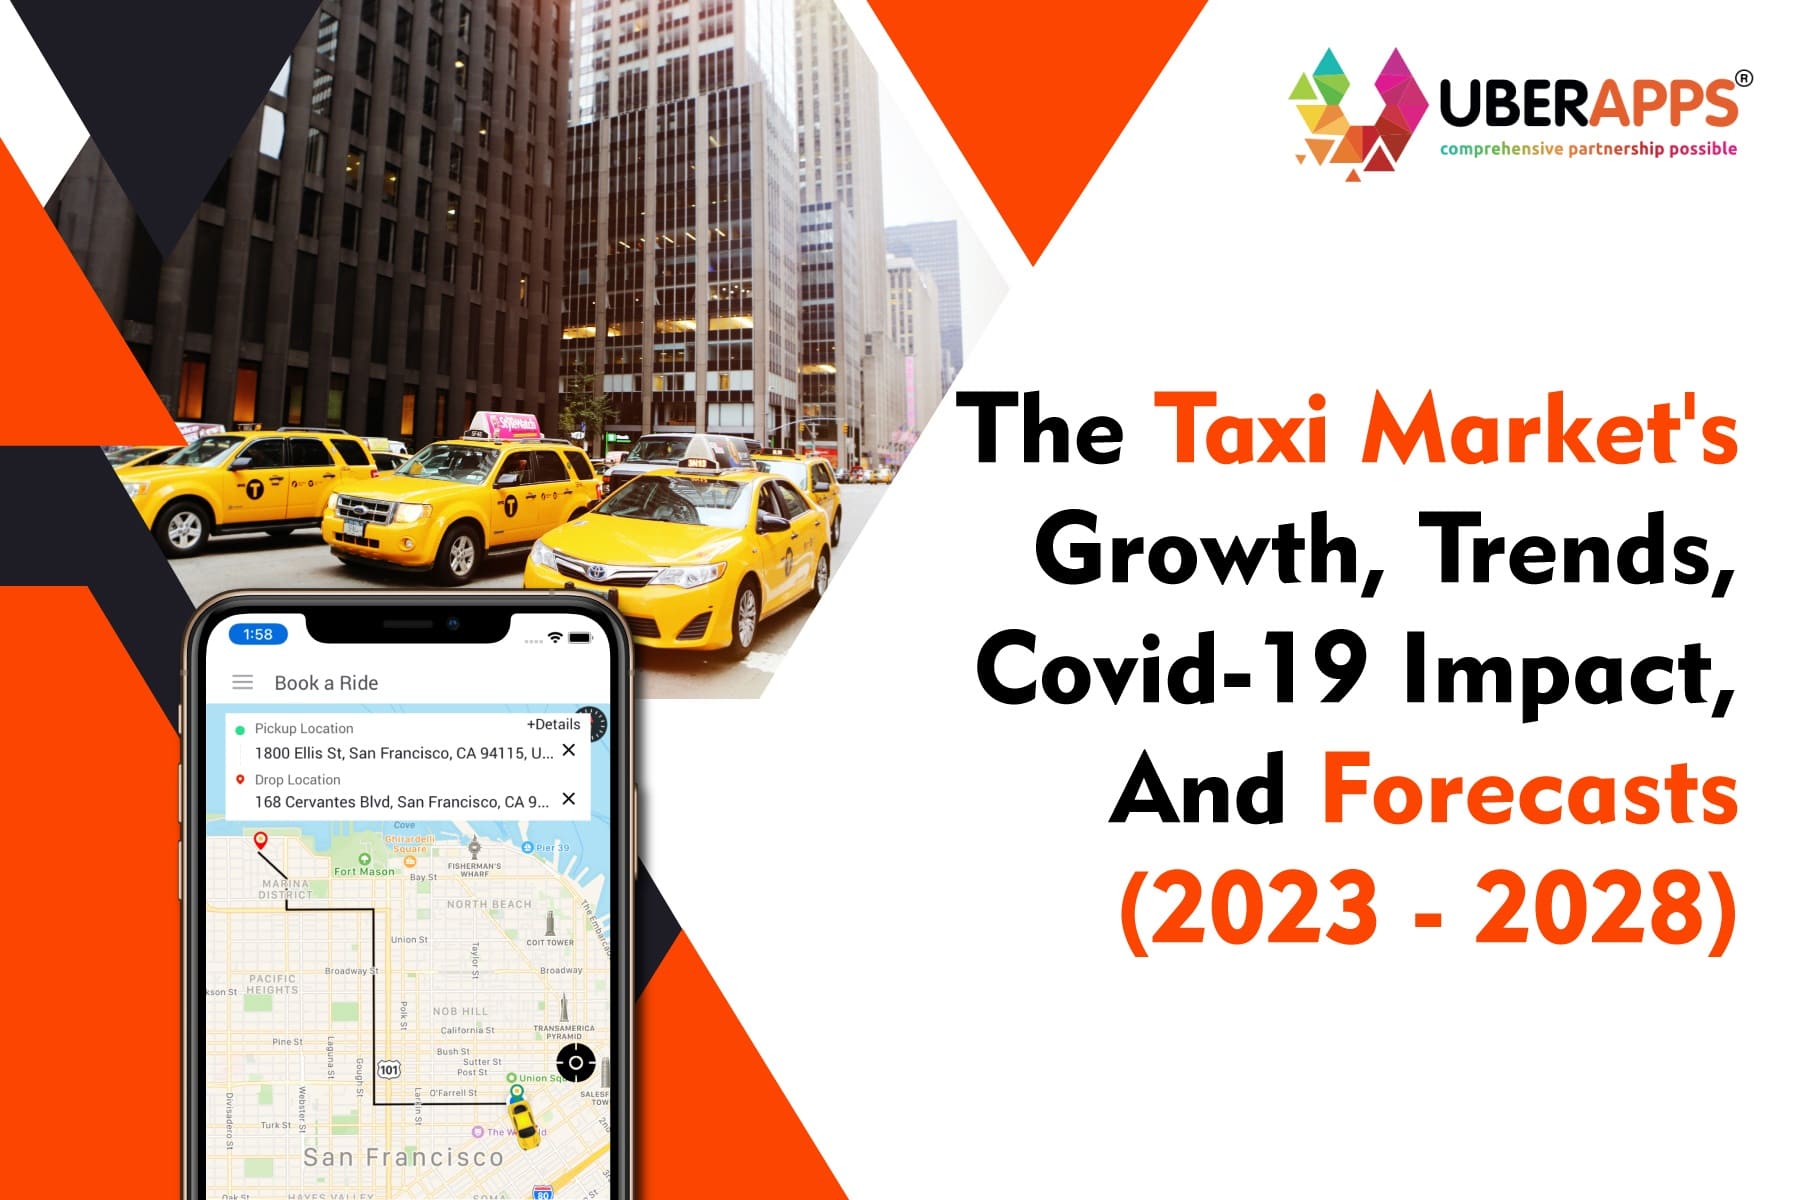 The Taxi Market's Growth, Trends, Covid-19 Impact, And Forecasts (2023 - 2028)